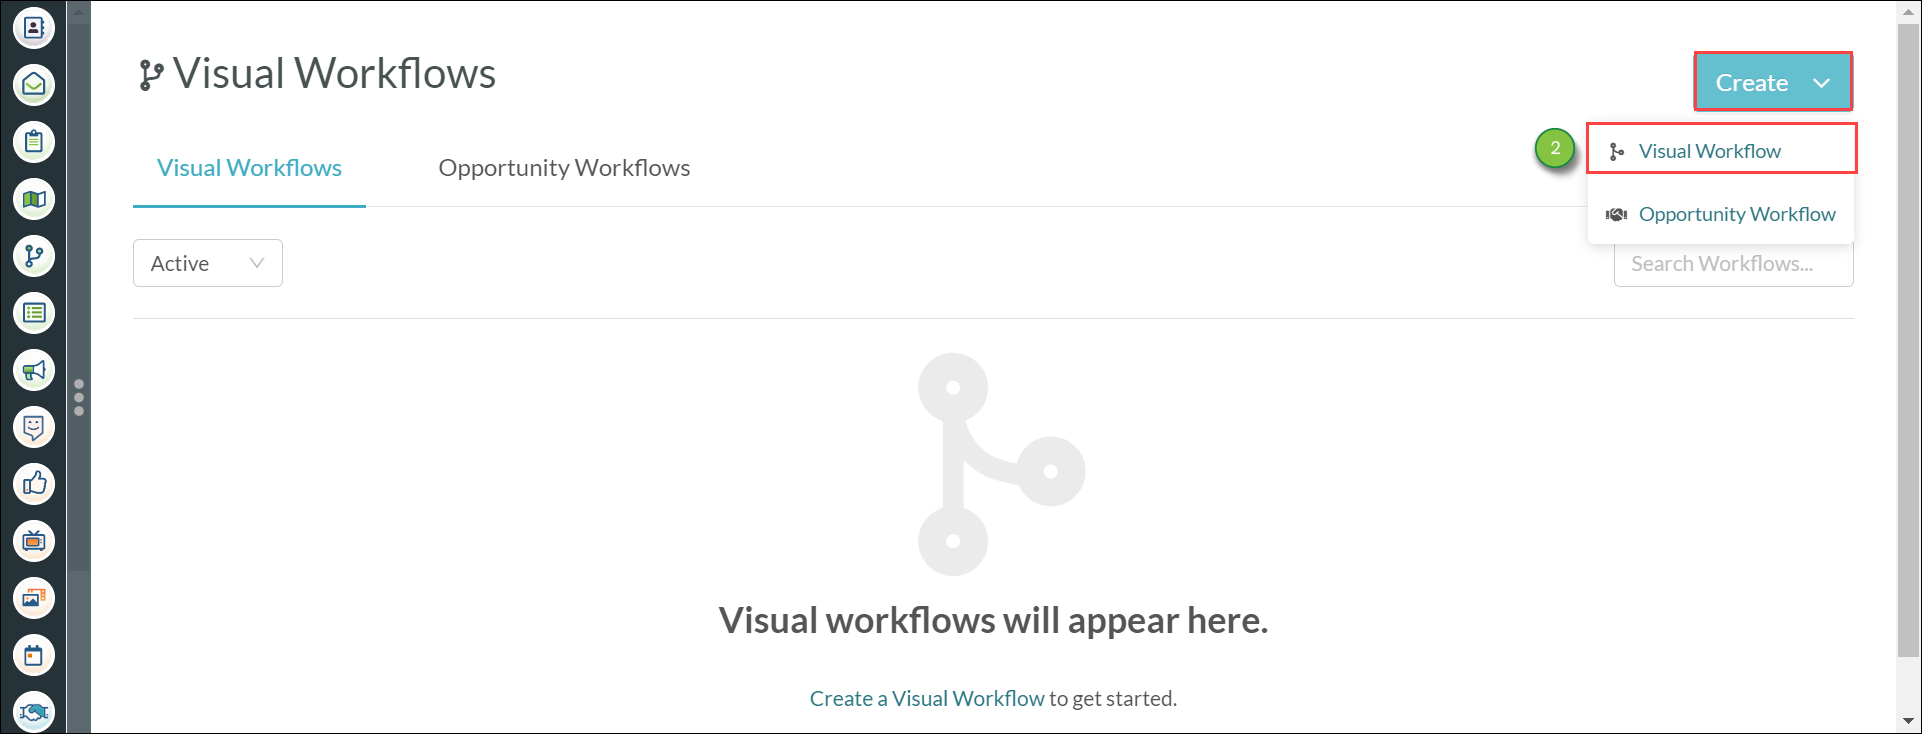 Create a new visual workflow